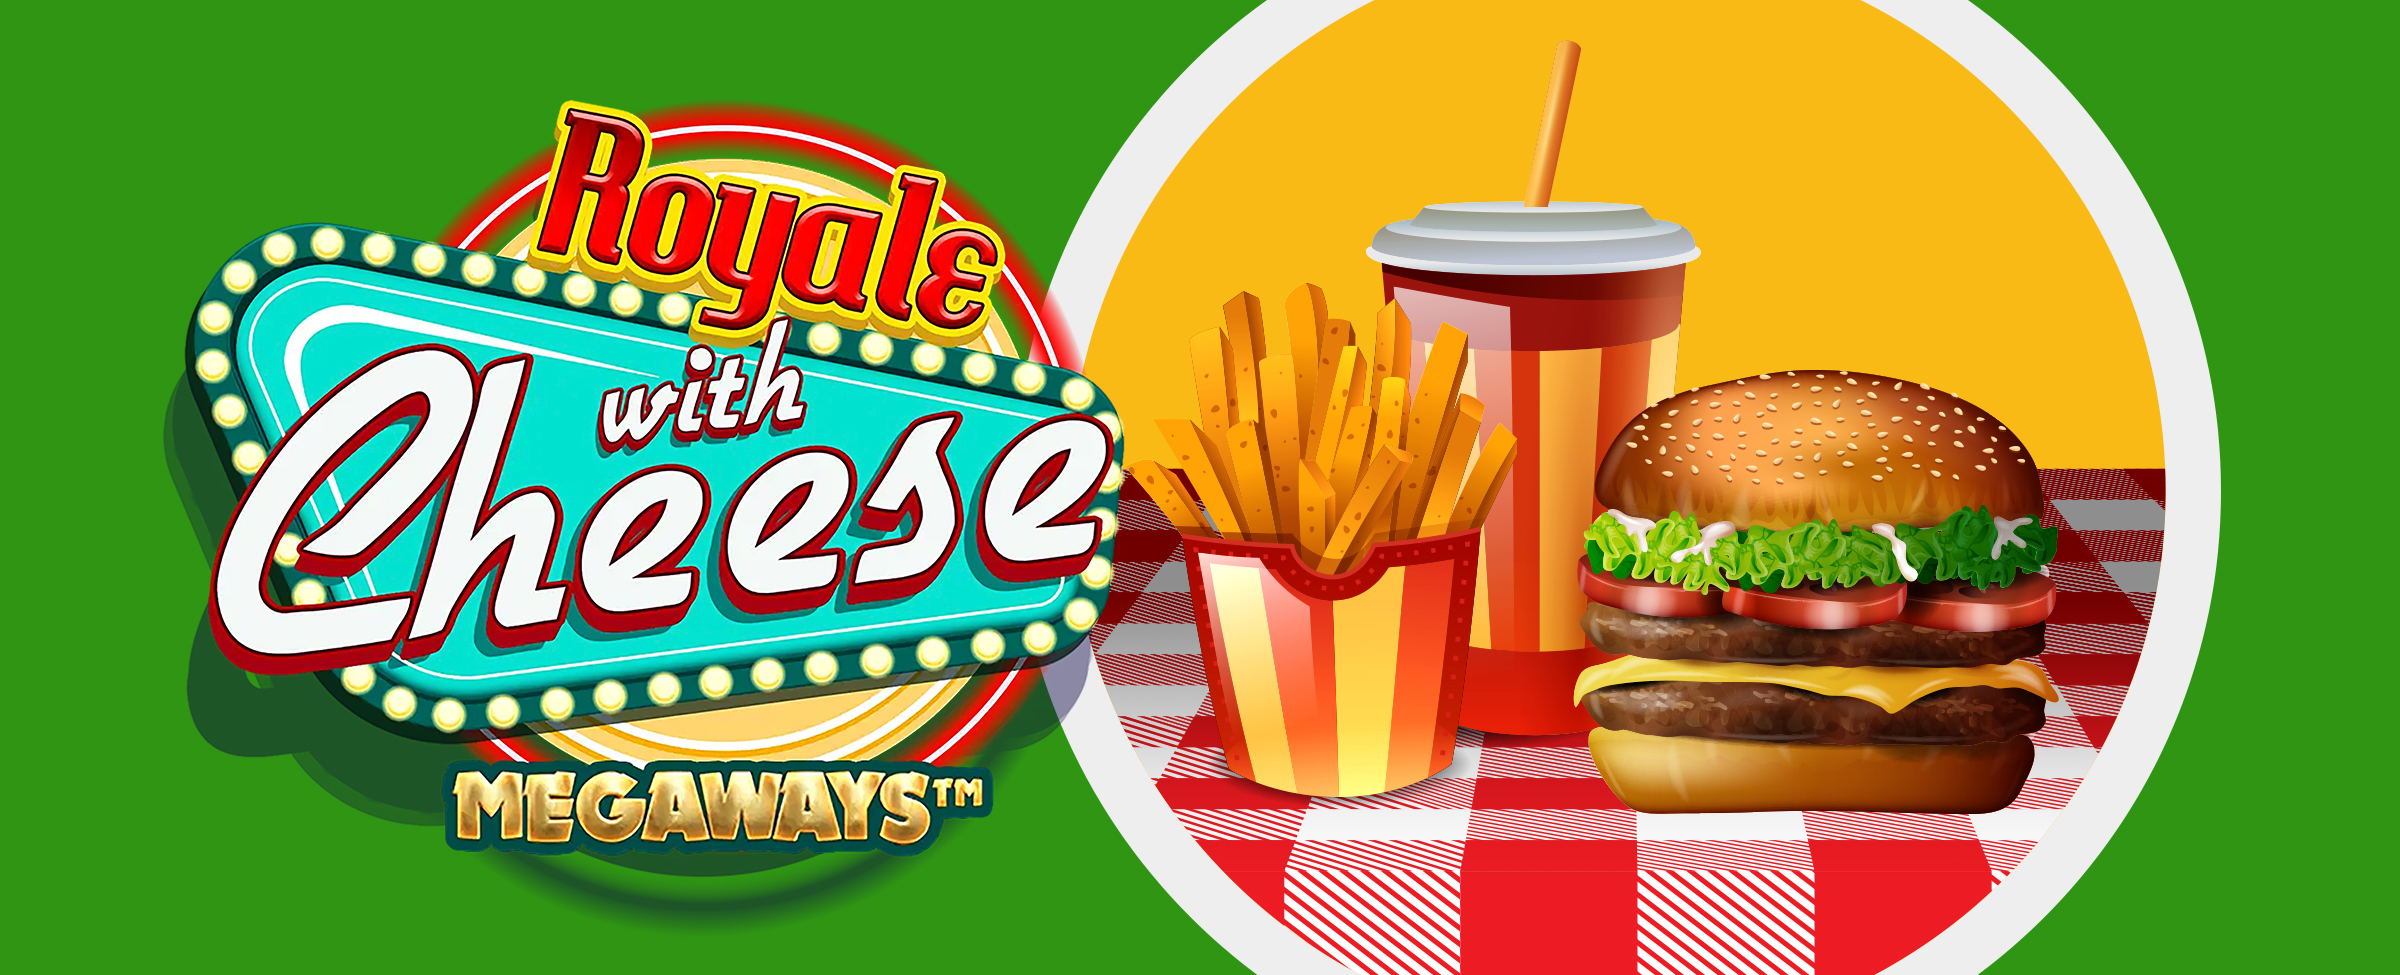 Have you been hitting the gym all week? Of course you have. Well, you deserve a cheat day, and Joe has just the game for you: Royale With Cheese Megaways.